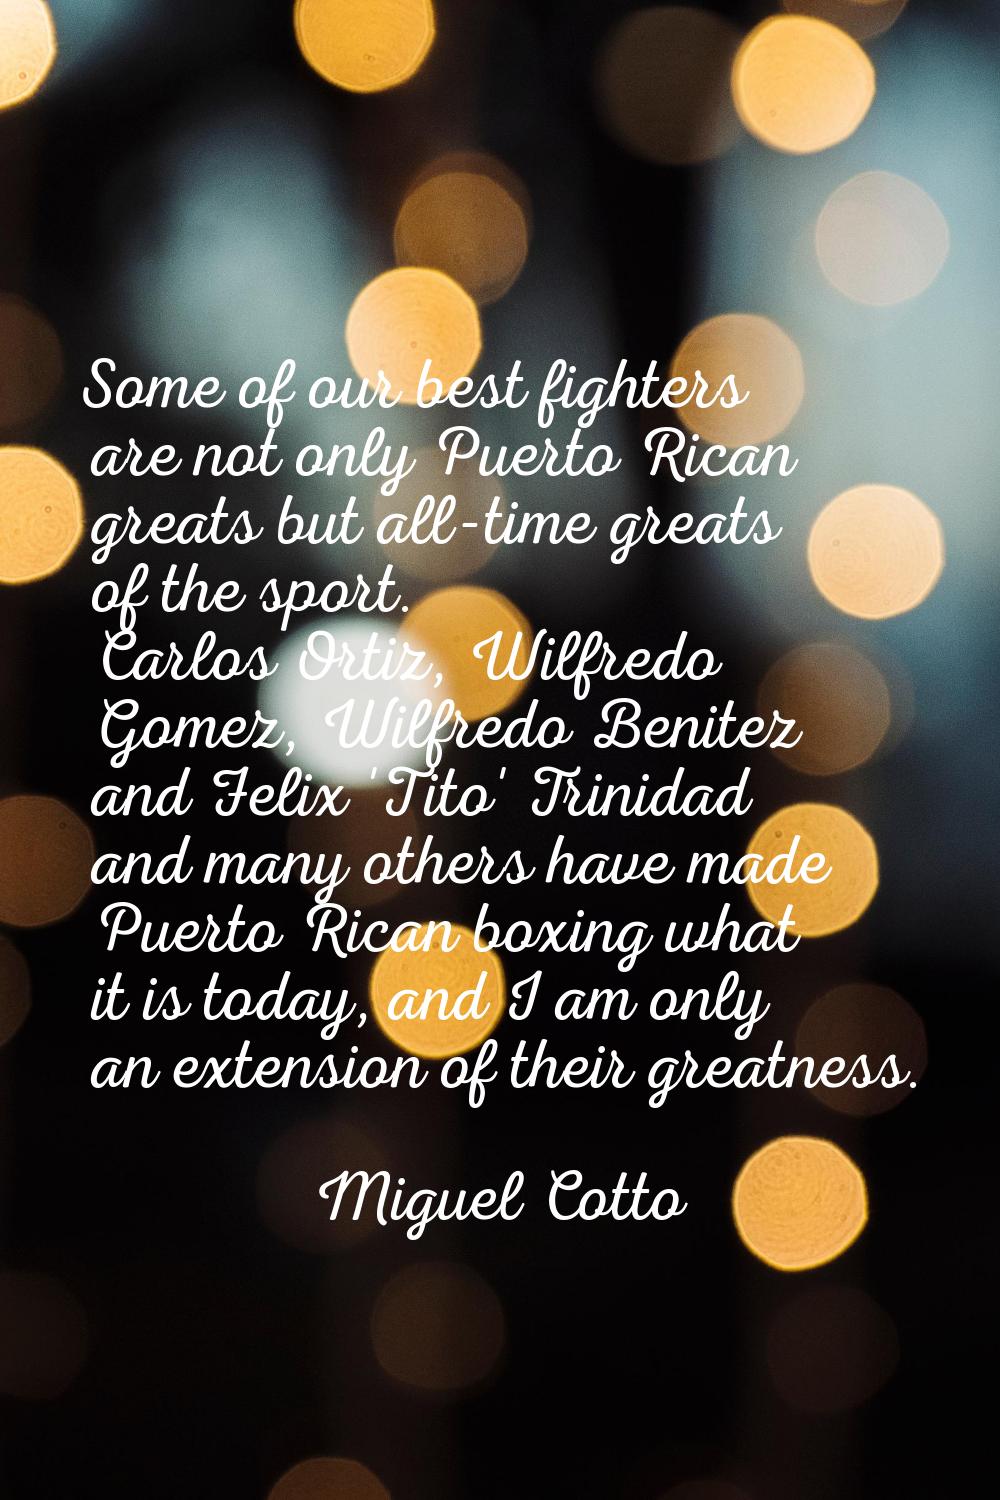 Some of our best fighters are not only Puerto Rican greats but all-time greats of the sport. Carlos